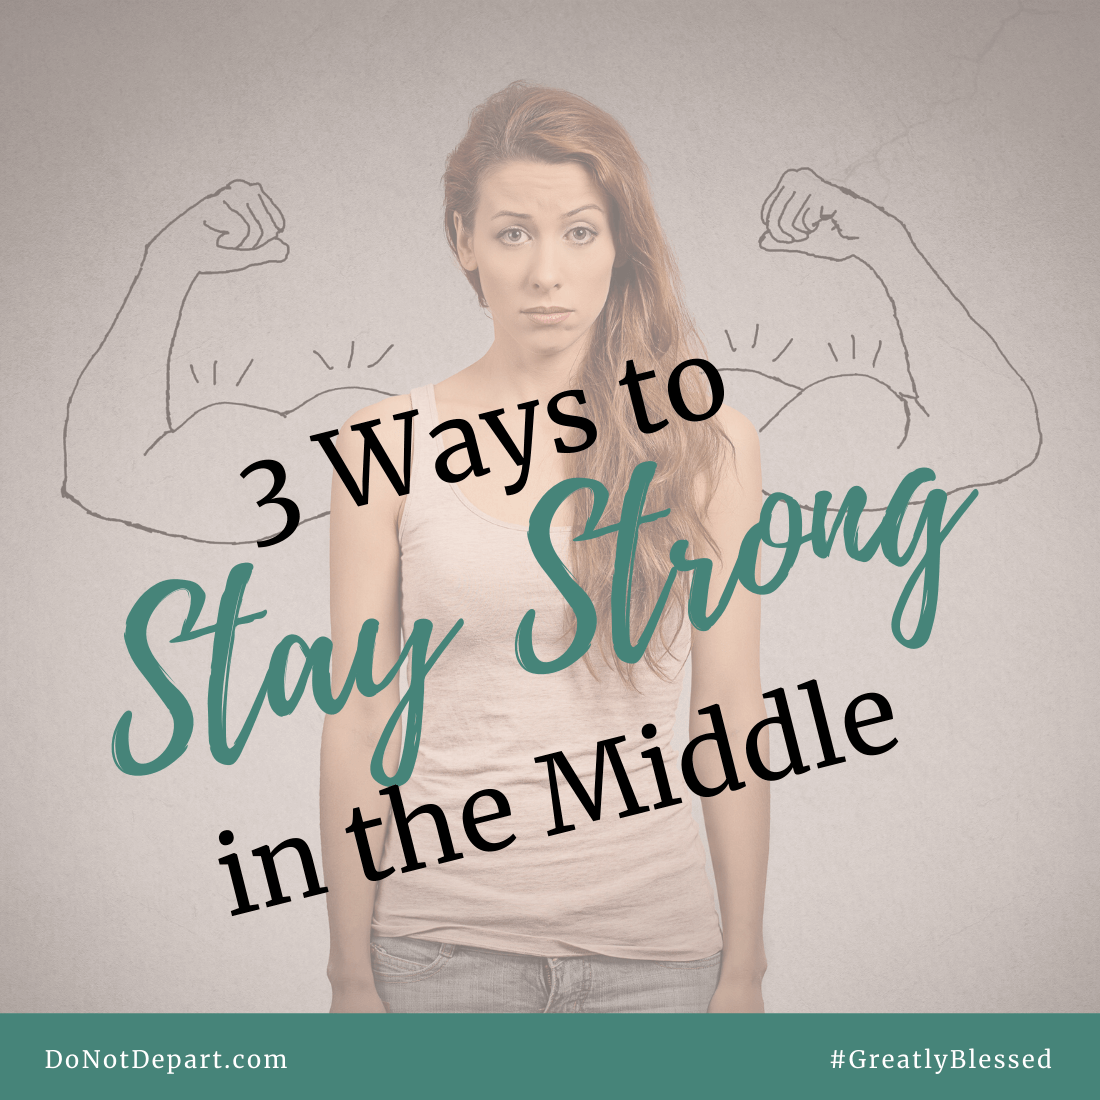 3 Ways to Stay Strong in the Middle